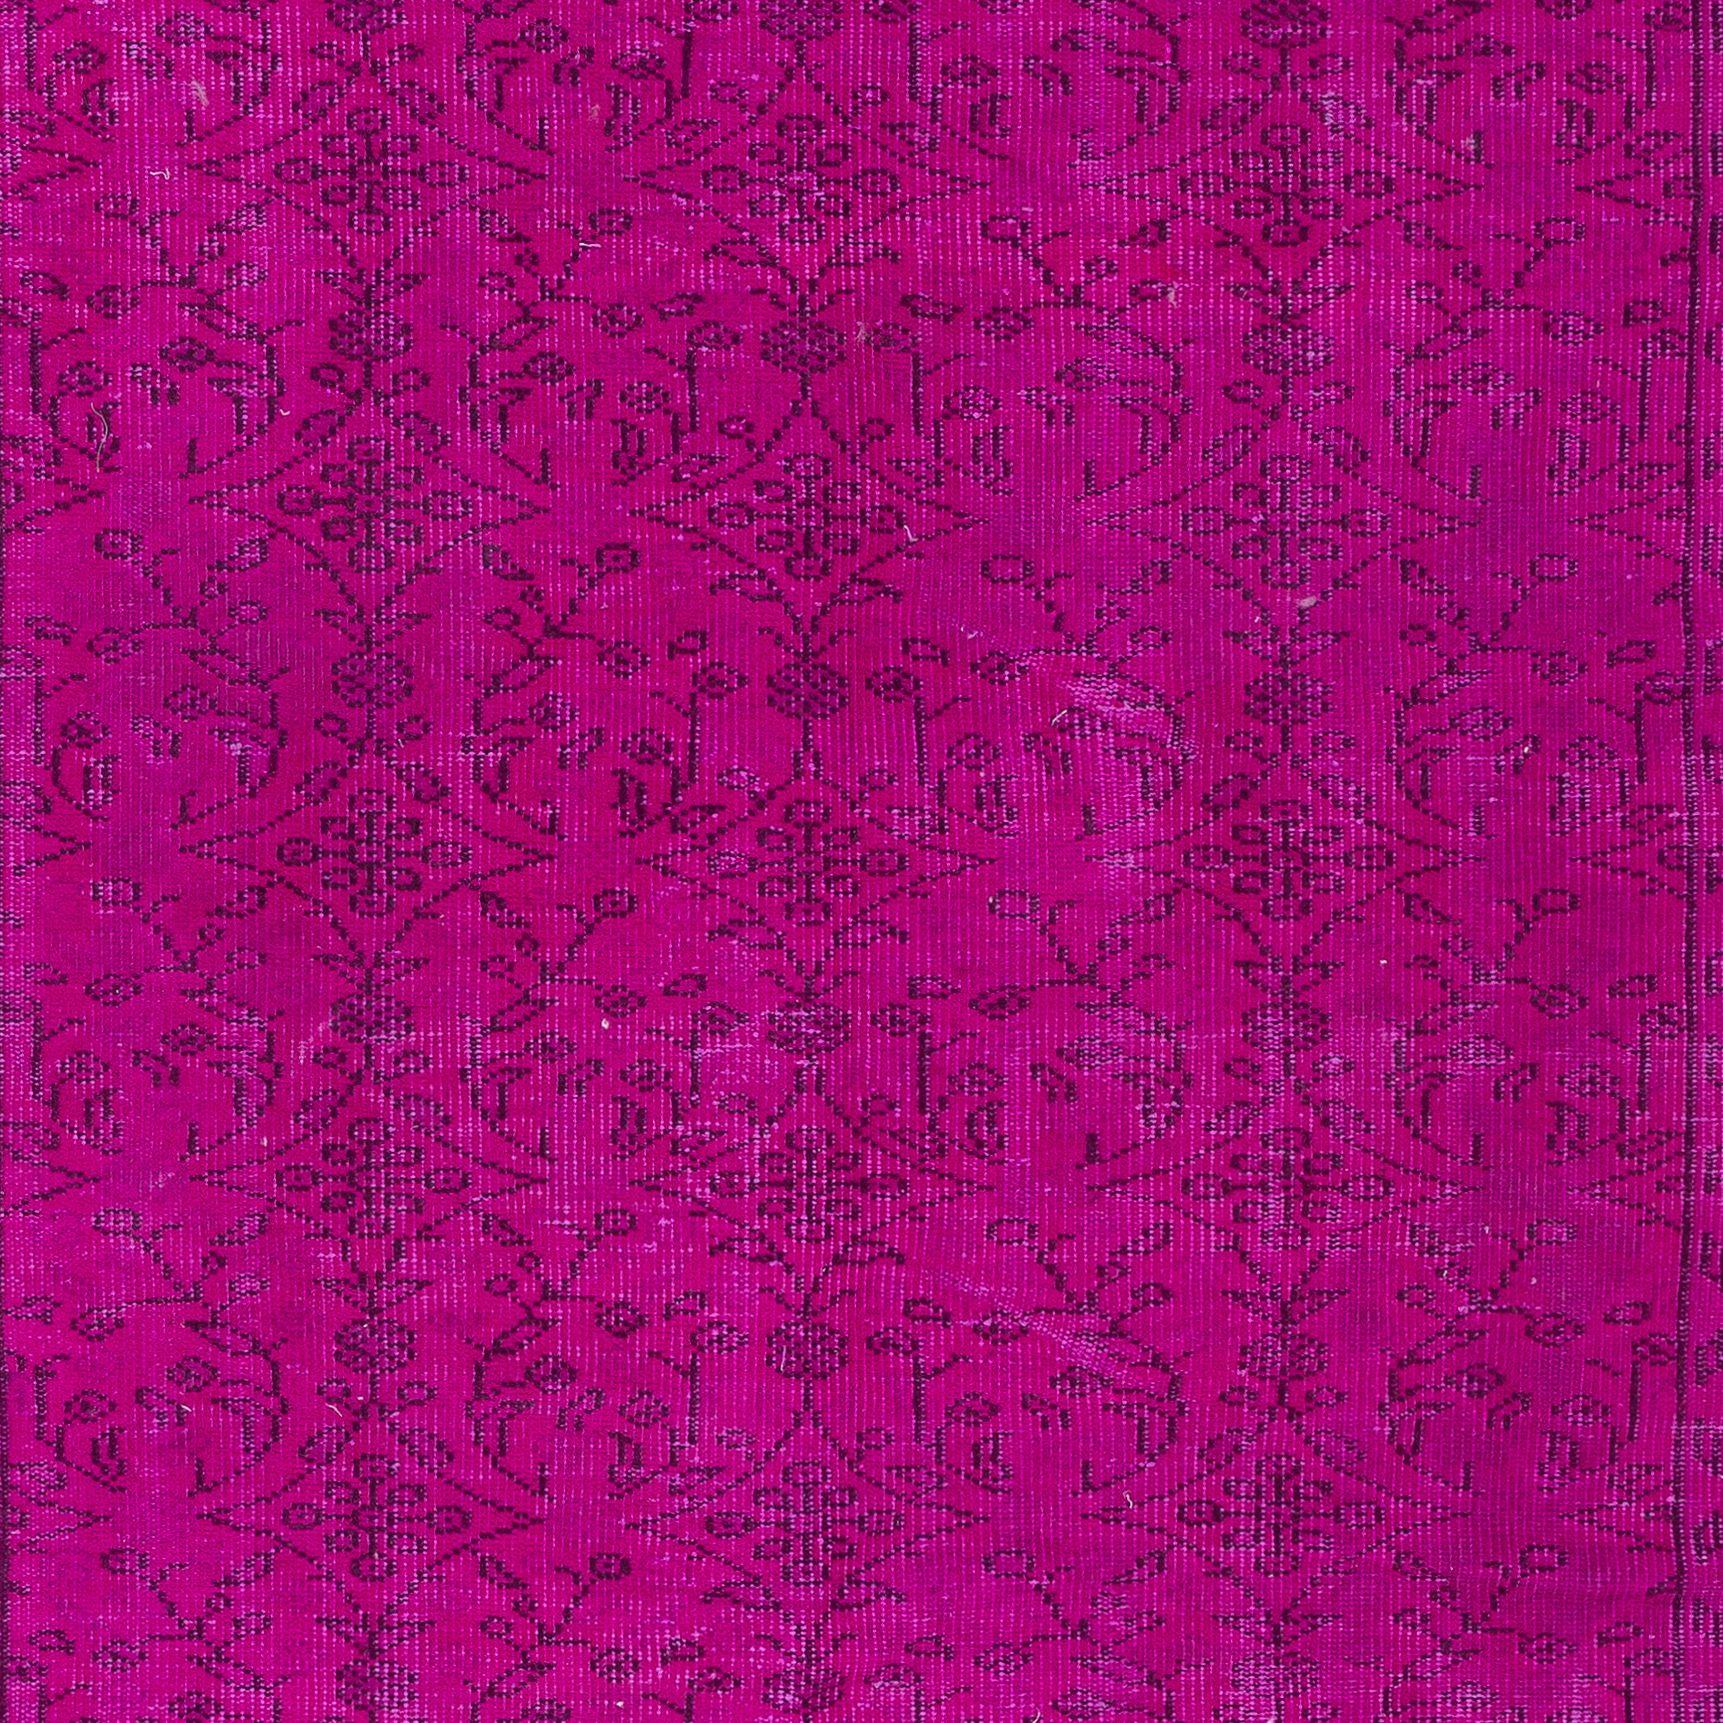 Hand-Woven 5.4x8.8 Ft Modern Handmade Turkish Bohem Rug in Hot Pink with Floral Design For Sale